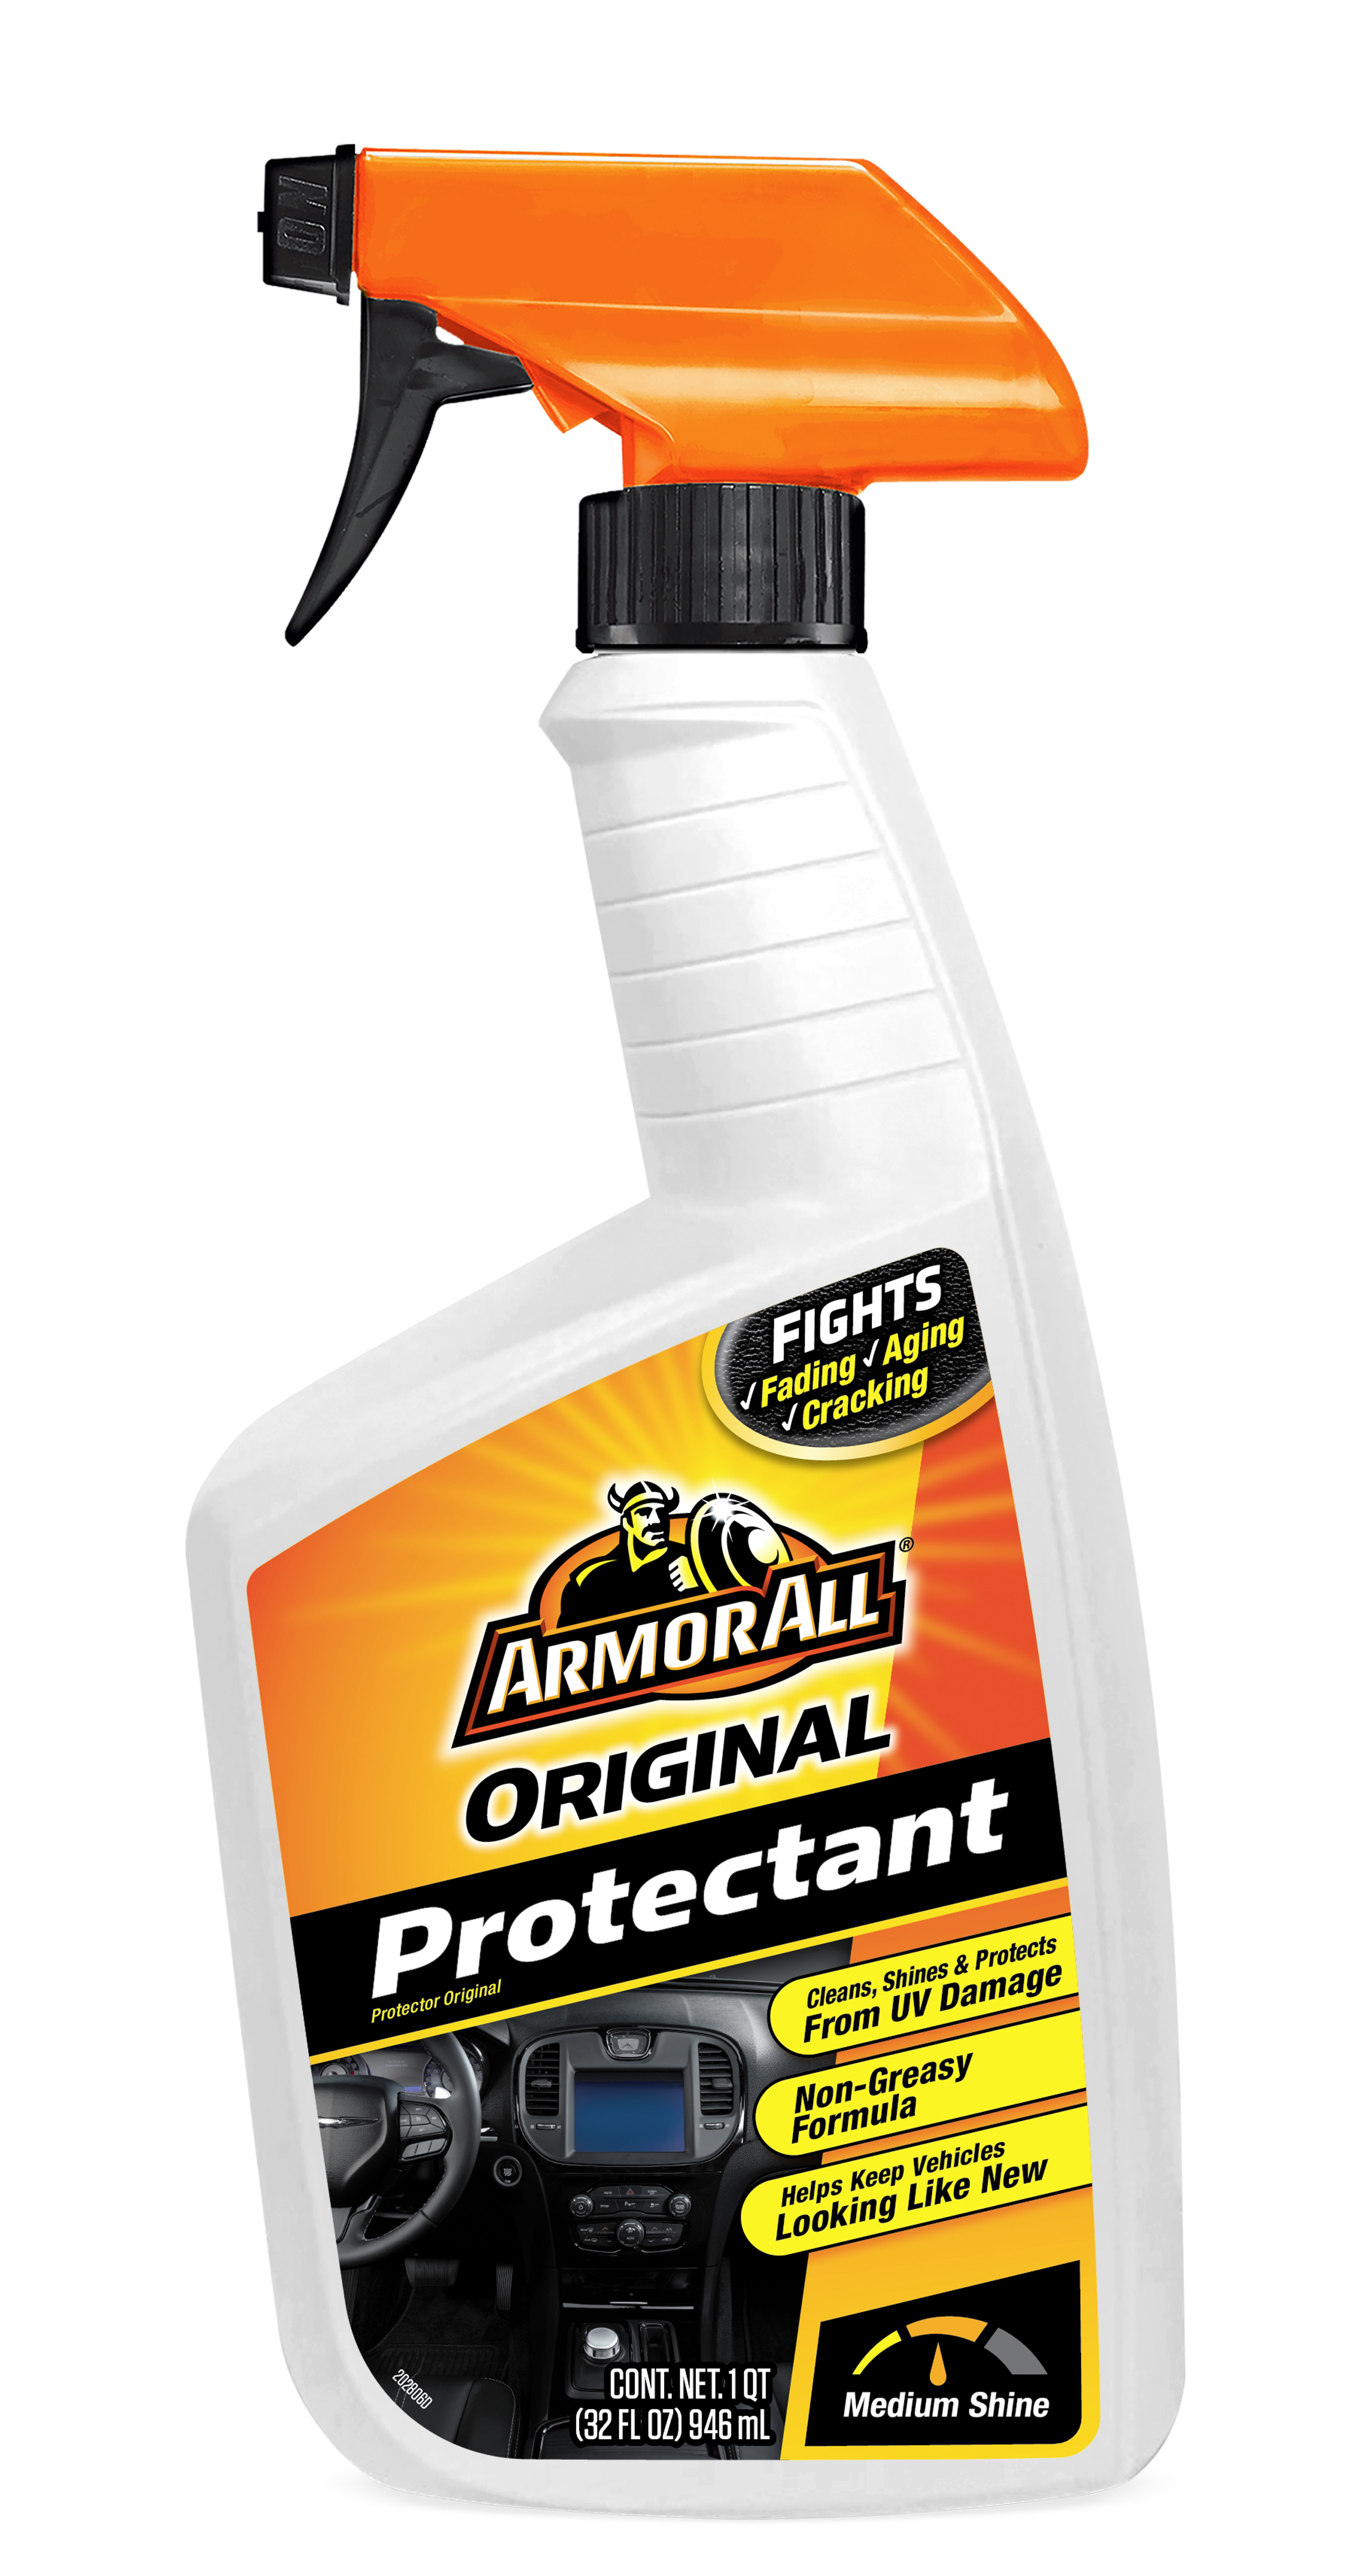 Armor All Car Wash Snow Foam Formula, Cleaning Concentrate for Cars, Truck,  Motorcycle, Bottles, 50 Fl Oz, Pack of 4, 19141-4PK